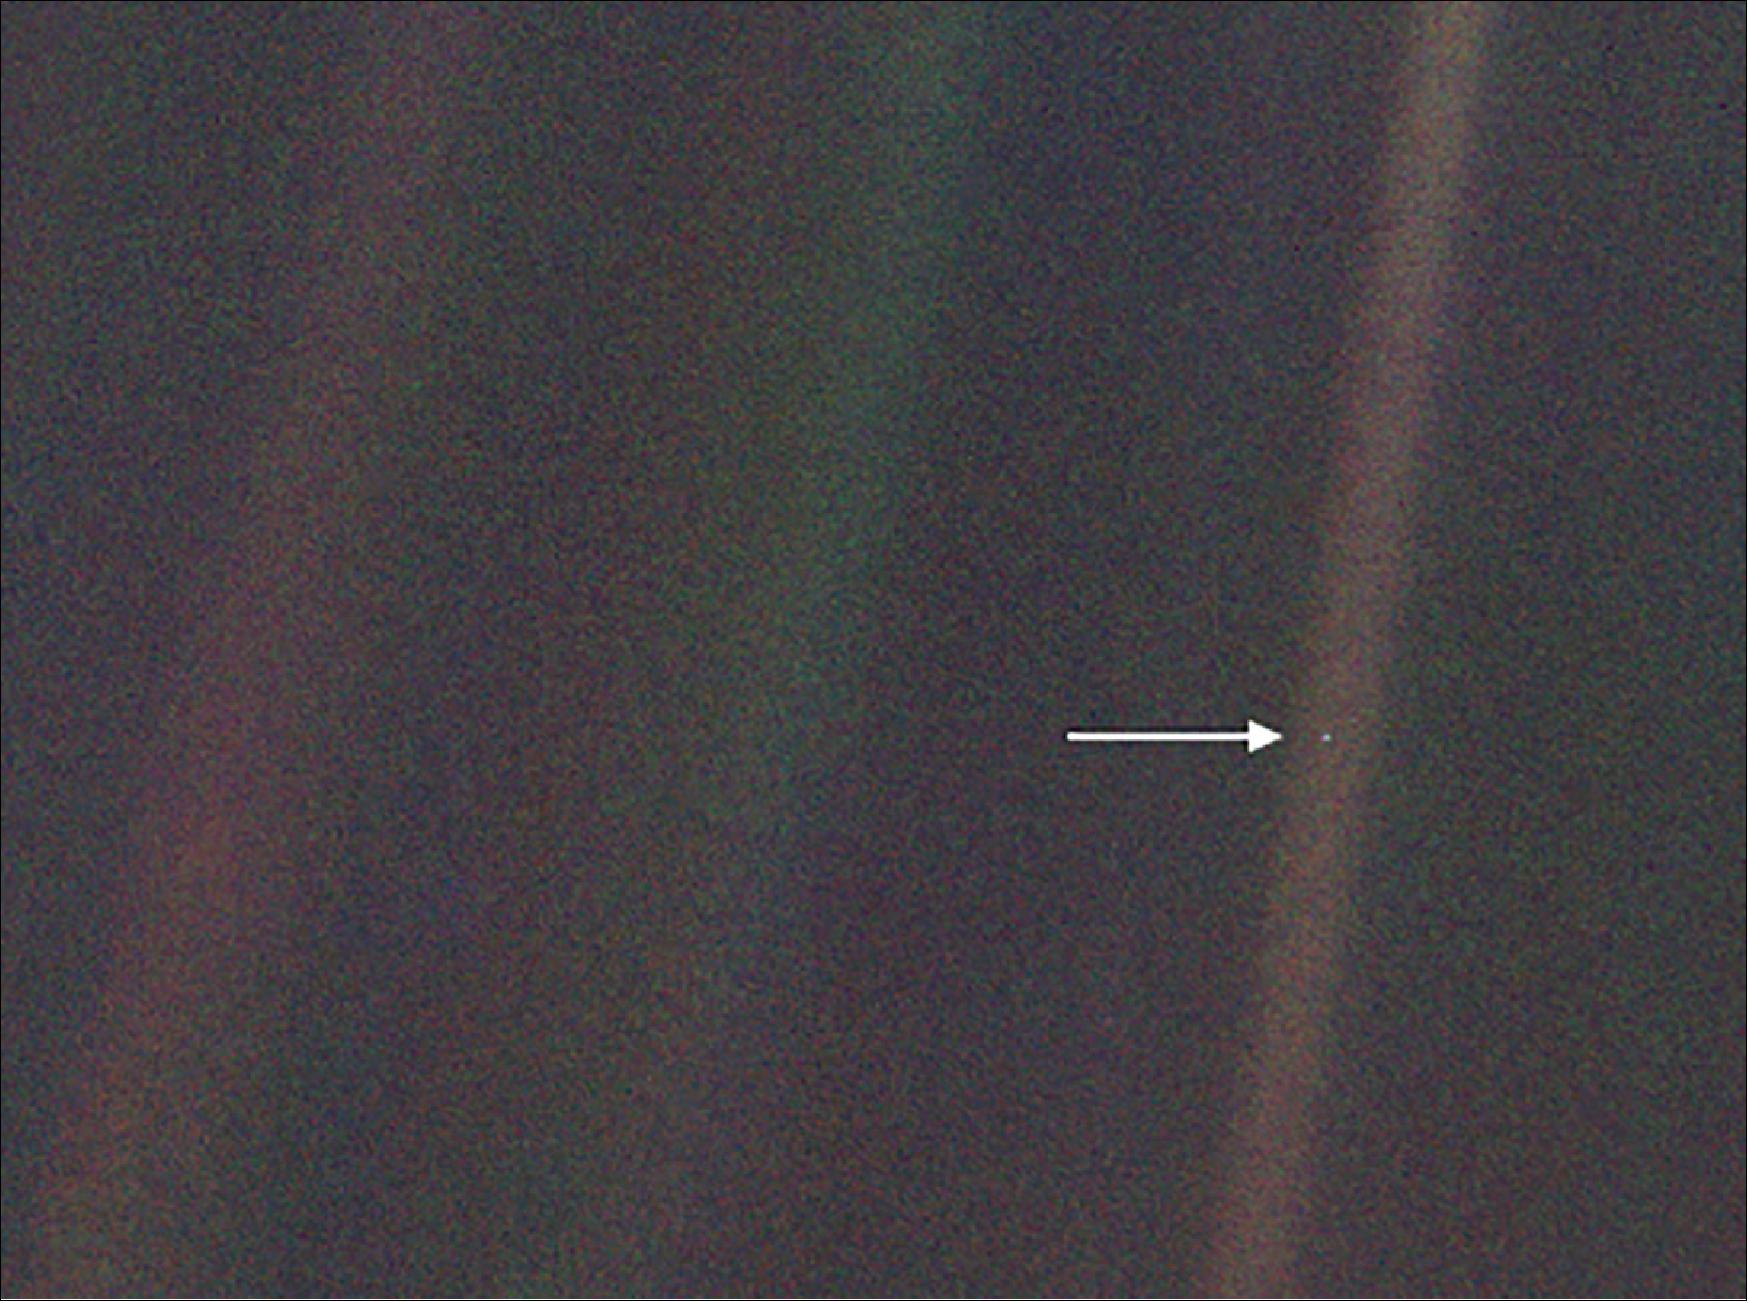 Figure 25: This image, taken by NASA's Voyager 1 spacecraft from beyond the orbit of Neptune, shows planet Earth as seen from about 5.9 billion km away. Earth appears as a very small point of light in the right half of the image, indicated by an arrow. Dubbed the "Pale Blue Dot," the image illustrates just how small an Earth-sized planet appears from far away (image credit: NASA/JPL-Caltech)